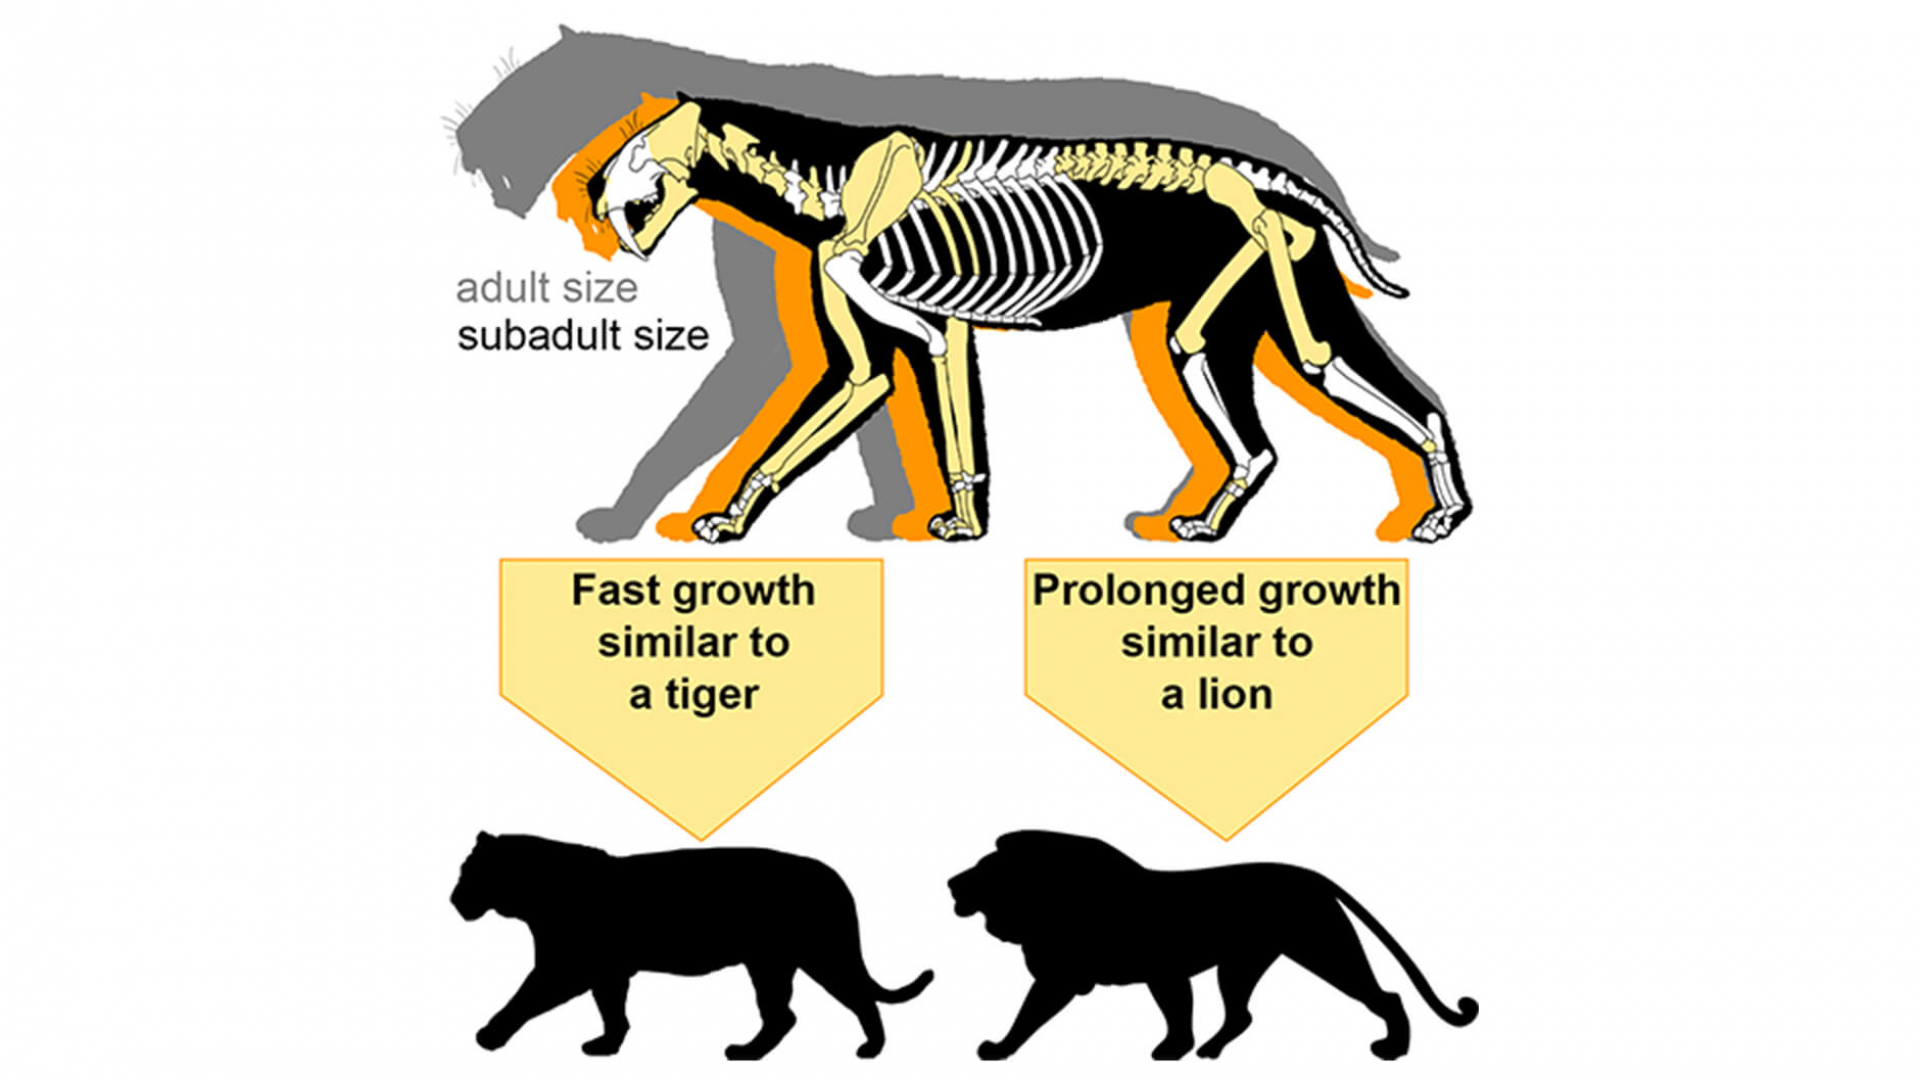 Sabre-toothed cat adult and subadult size comparison.